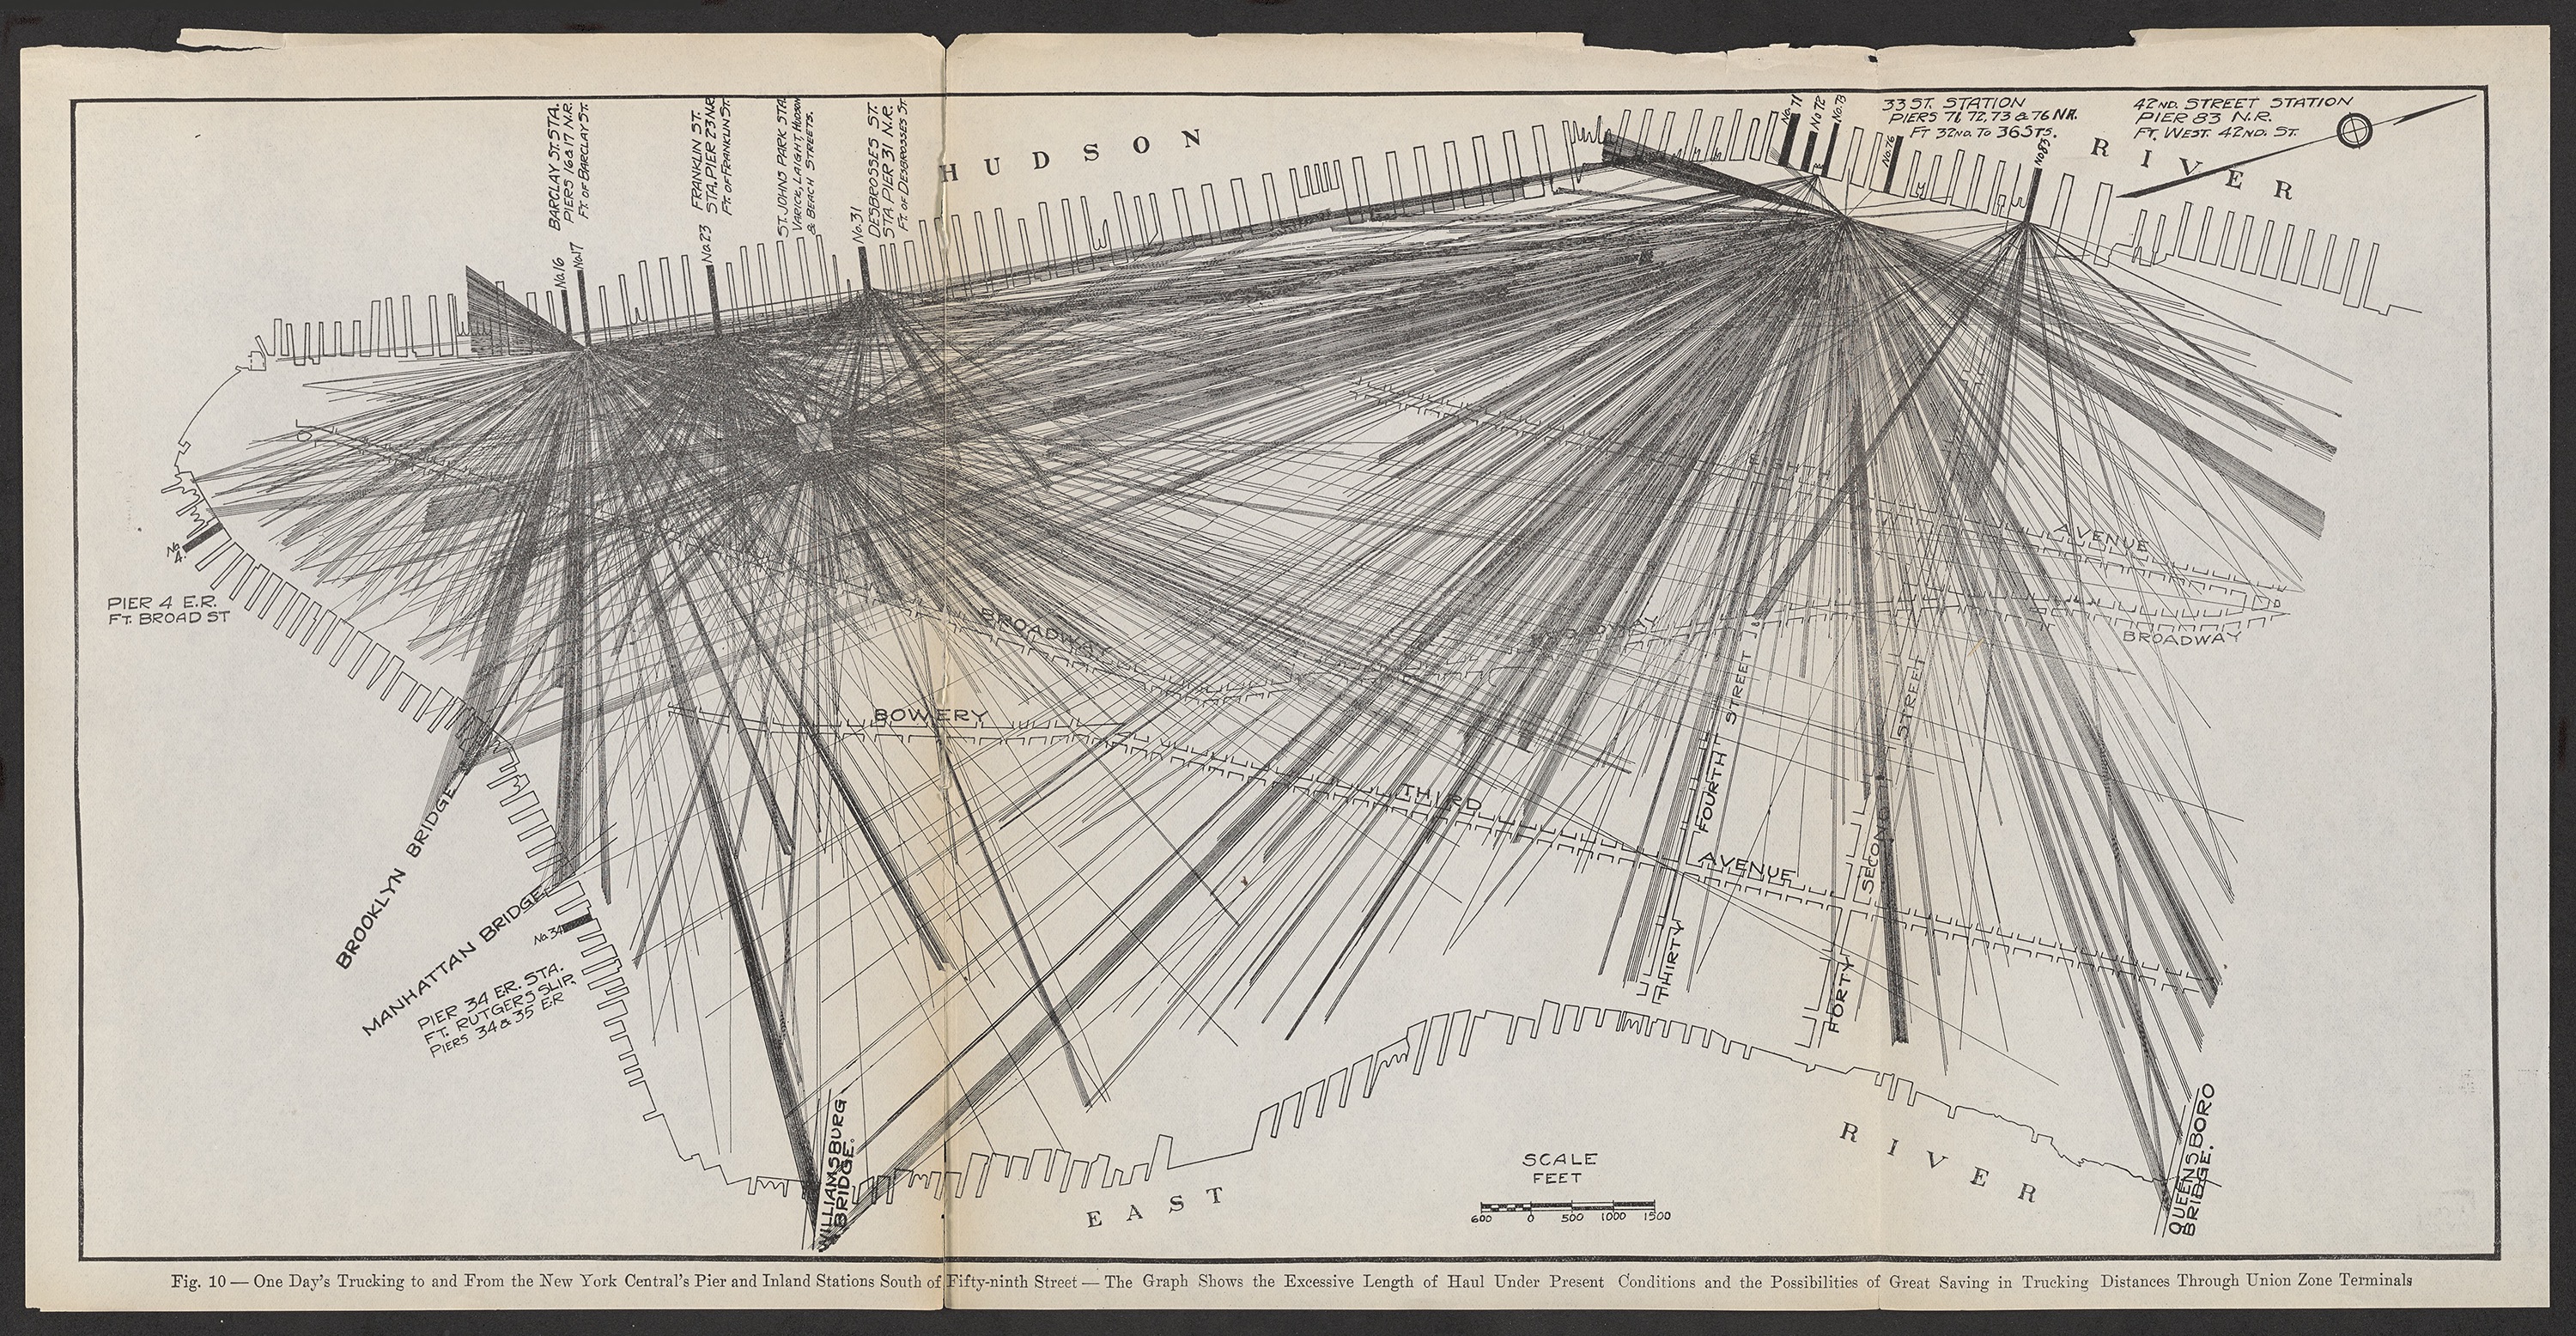 Diagram of congestion in Manhattan, due to the accumulation of freight delivered along the Hudson River. One Day’s Trucking to and from the New York Central’s Pier and Inland Stations South of Fifty-ninth Street (Albany, NY: J.B. Lyon Co, 1920). Seymour B. Durst Old York Library Collection, Avery Architectural & Fine Arts Library, Columbia University.